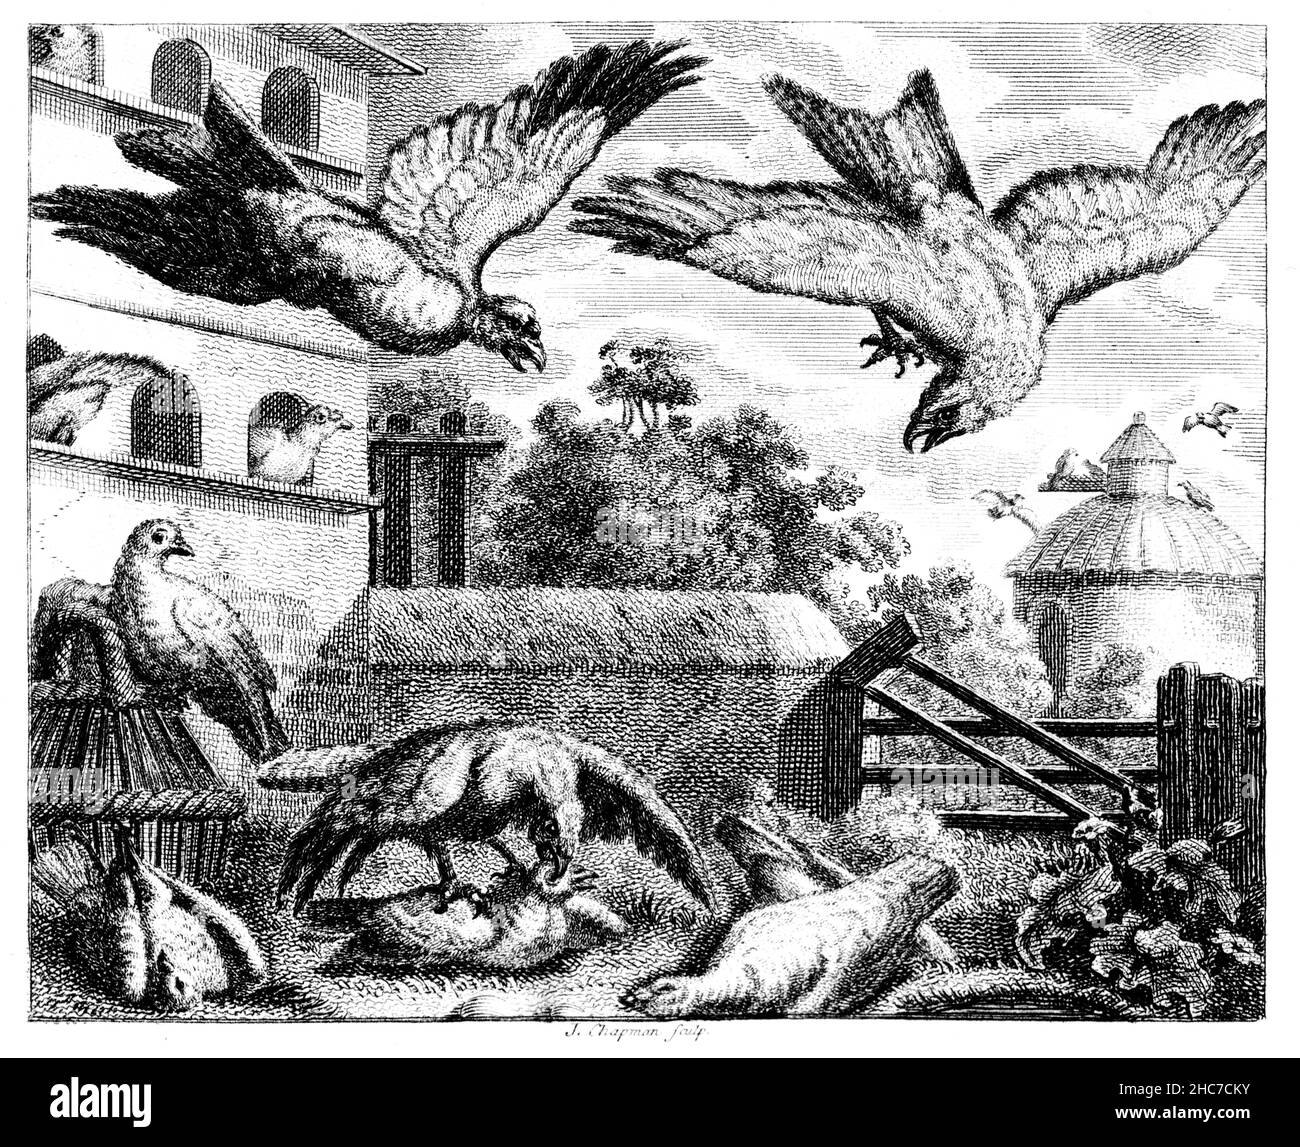 engraved illustration of The Kite and the Pigeons, a tale of political foolishness, accepting an enemy as leader, from 1793 First Edition of Stockdale Stock Photo